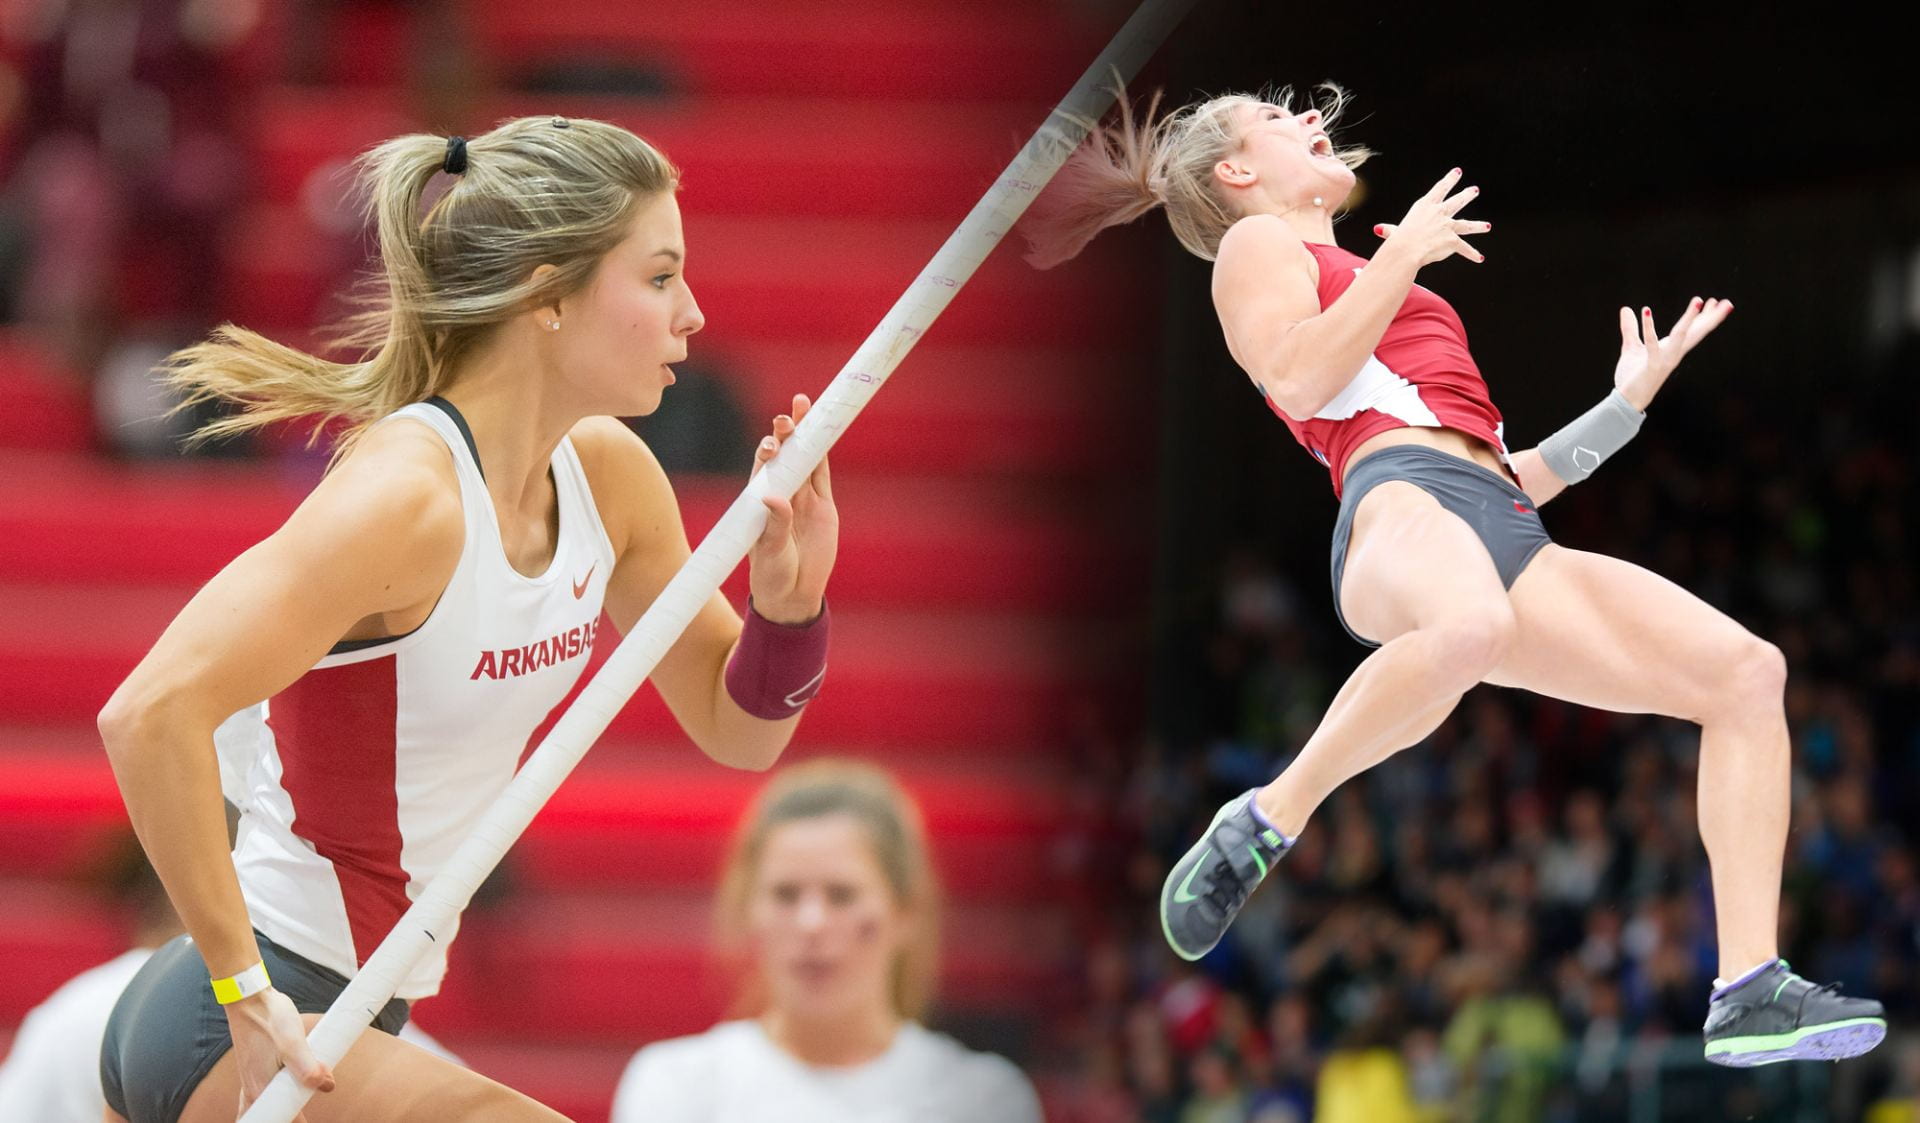 Lexi Jacobus and Tori Hoggard soar high, clearing 14-foot- and 15-foot-high bars to set records and win national championships. By any measure these twin sisters are stellar, but some of their stats are less well-known.